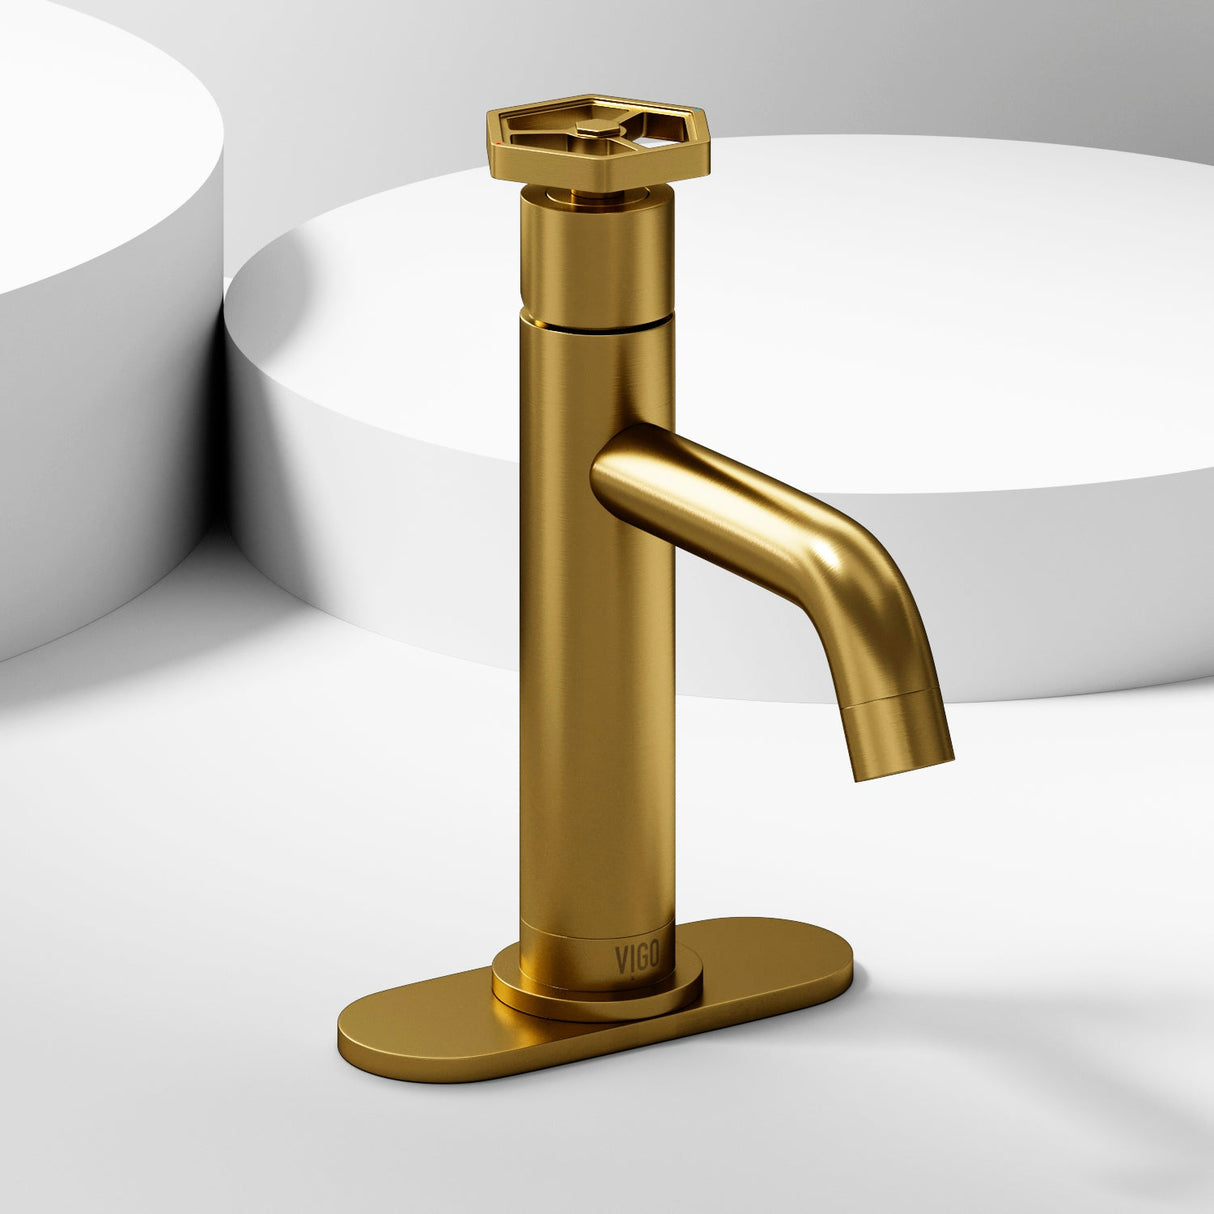 VIGO Ruxton Pinnacle 1-Handle Single Hole Bathroom Faucet with Deck Plate in Matte Brushed Gold VG01050MGK1